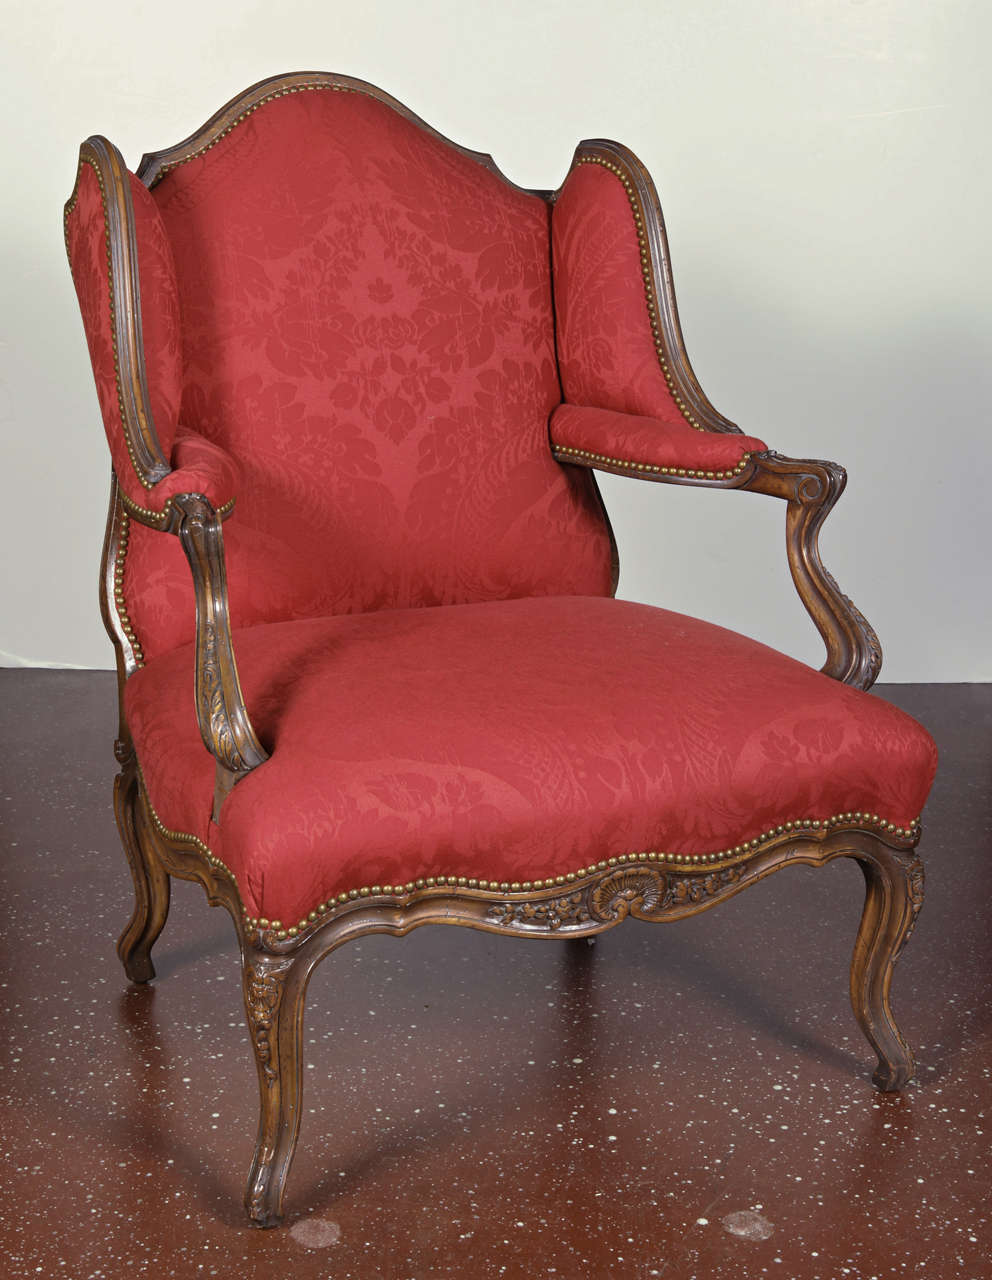 French Provincial style wing-back fauteuil upholstered in red wool damask, with nail-head trim, raised on cabriole legs.